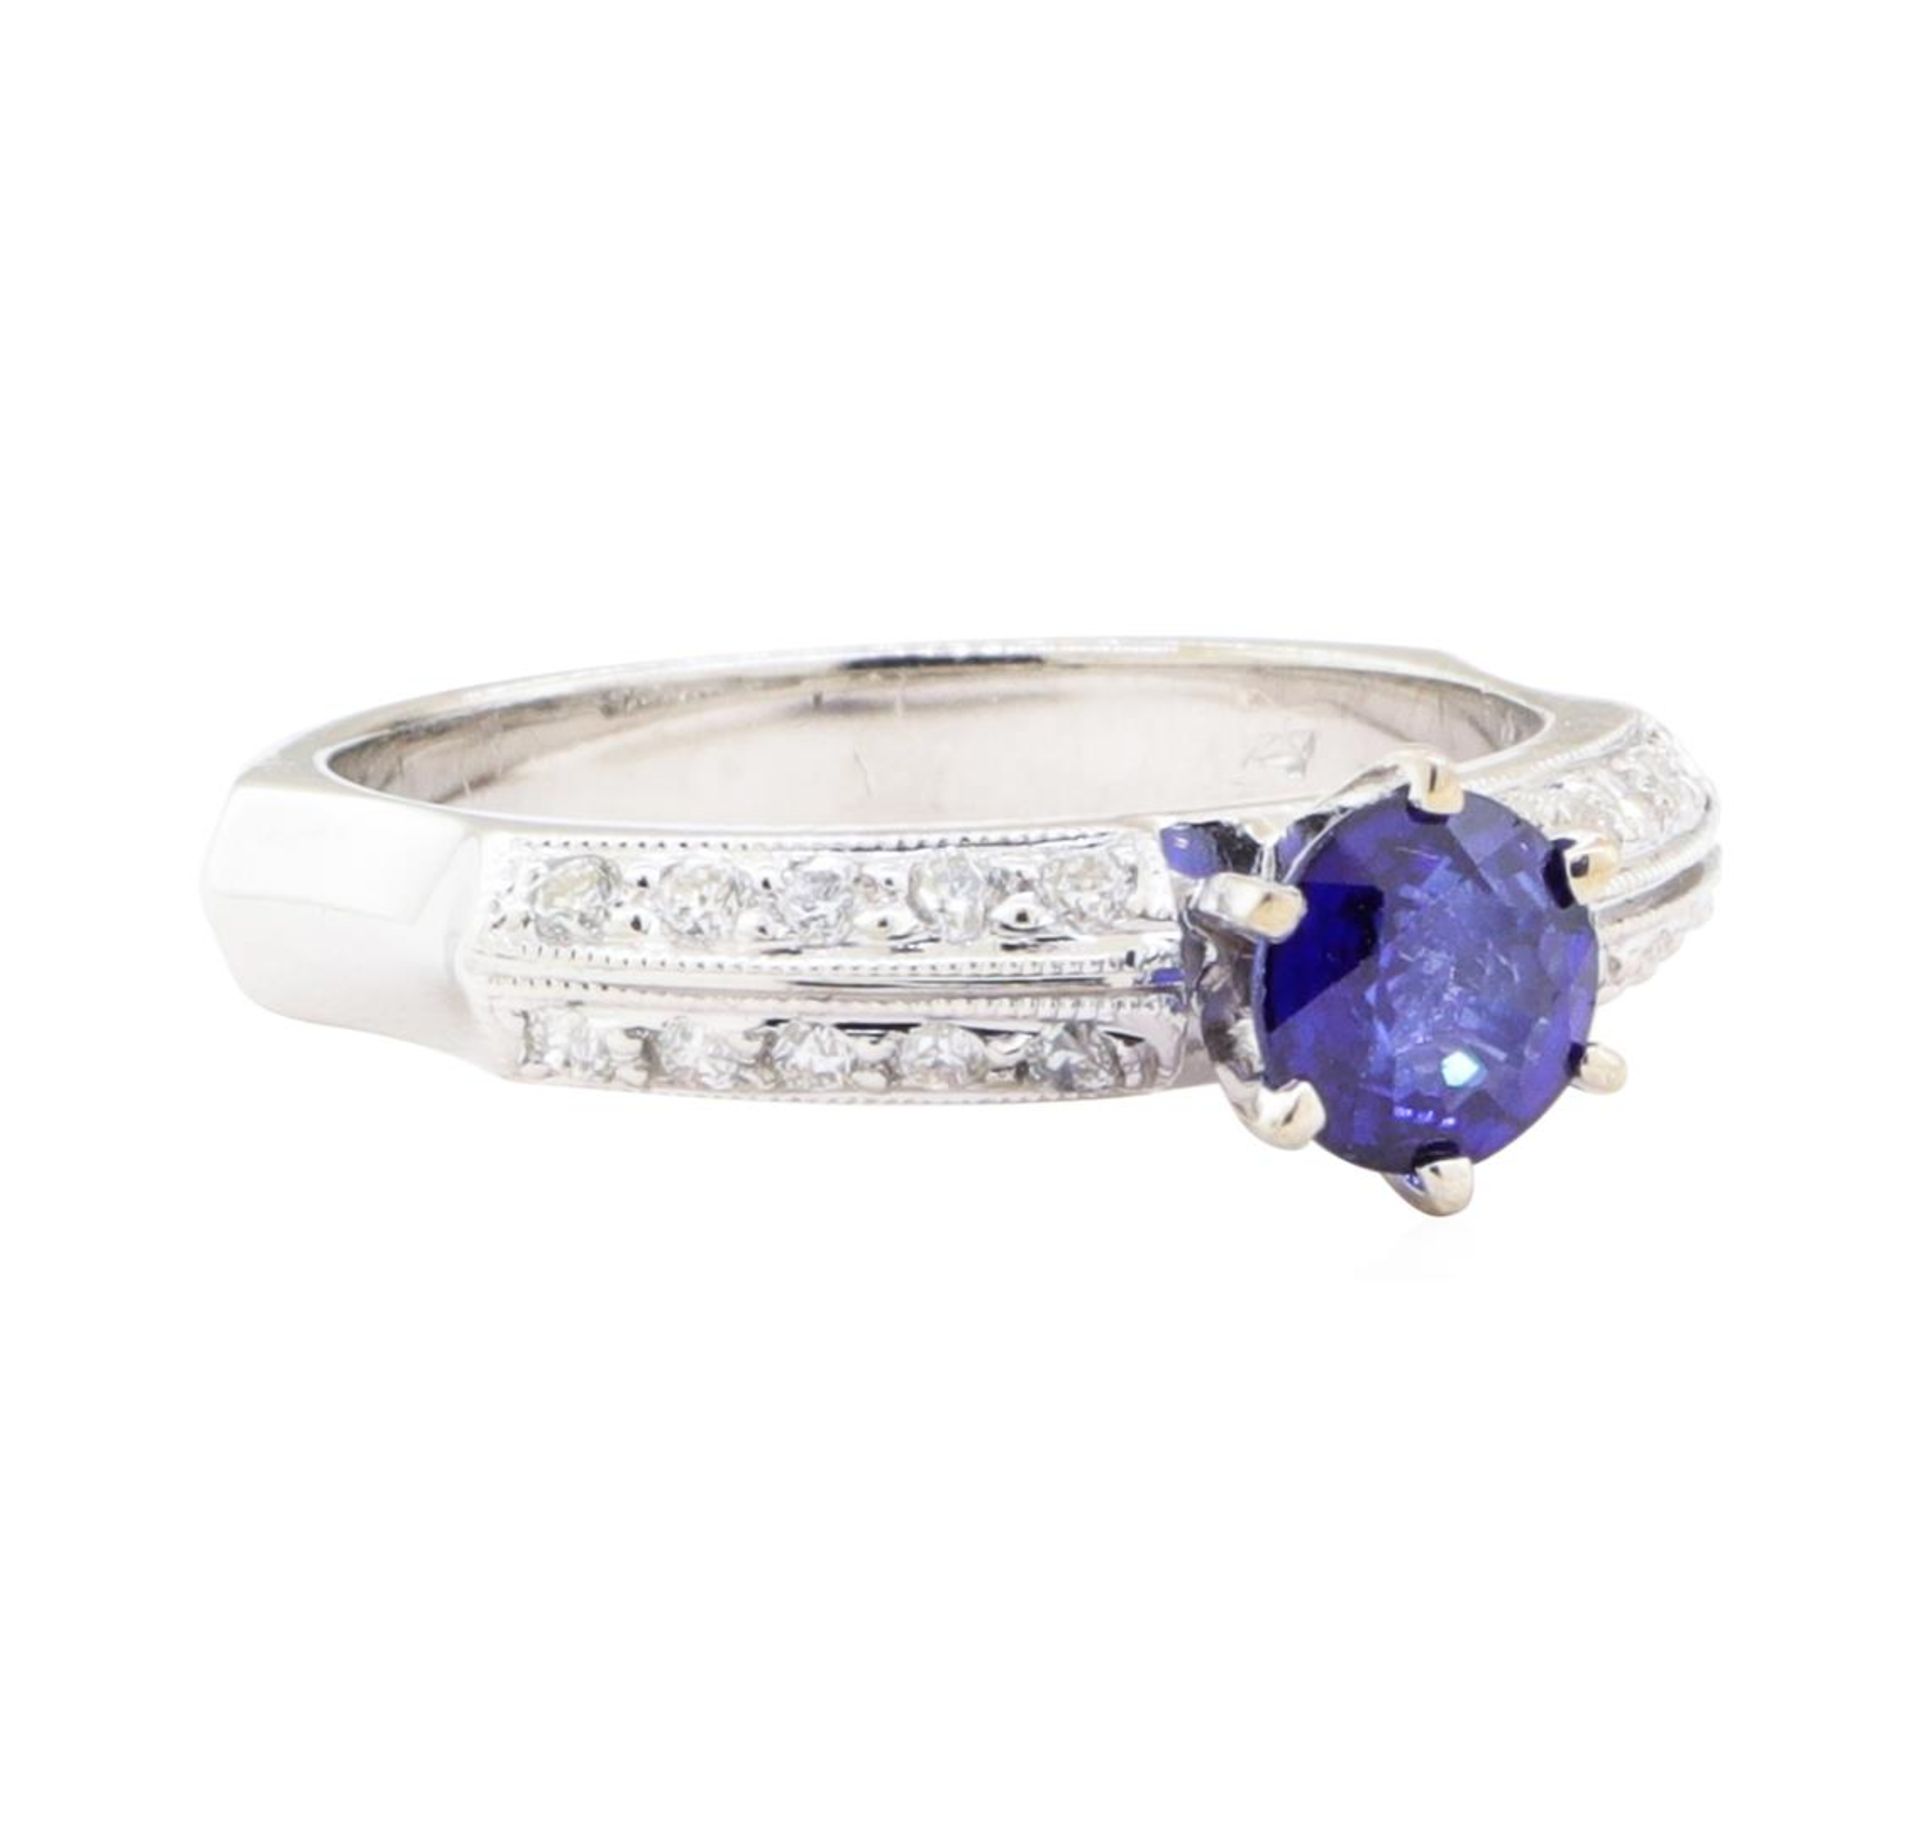 0.95 ctw Sapphire And Diamond Ring - 18KT White Gold - Image 2 of 10